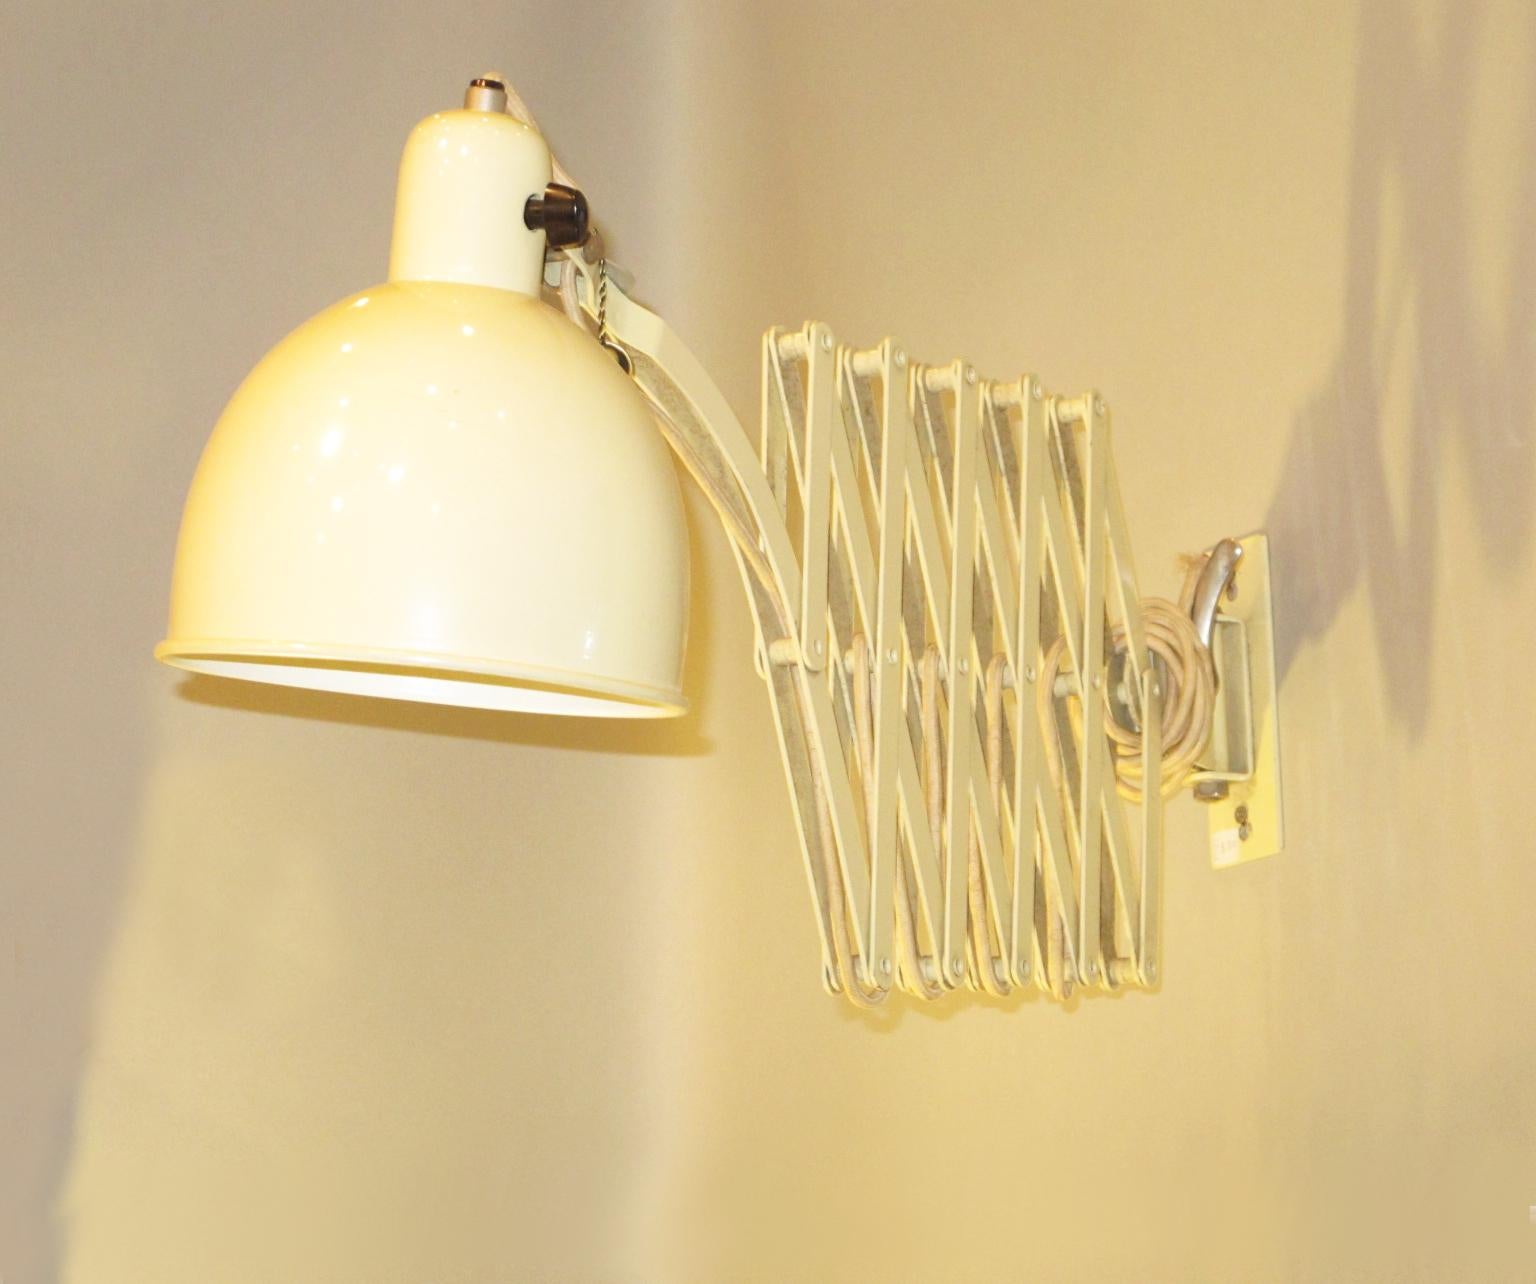 This is an original extendable metal wall lamp, scissor sconce, designed by famous Bauhaus school metal workshop foreman Christian Dell in 1933 for Kaiser Idell. This large version has an off-white enameled paint metal and chromed screws. The lamp